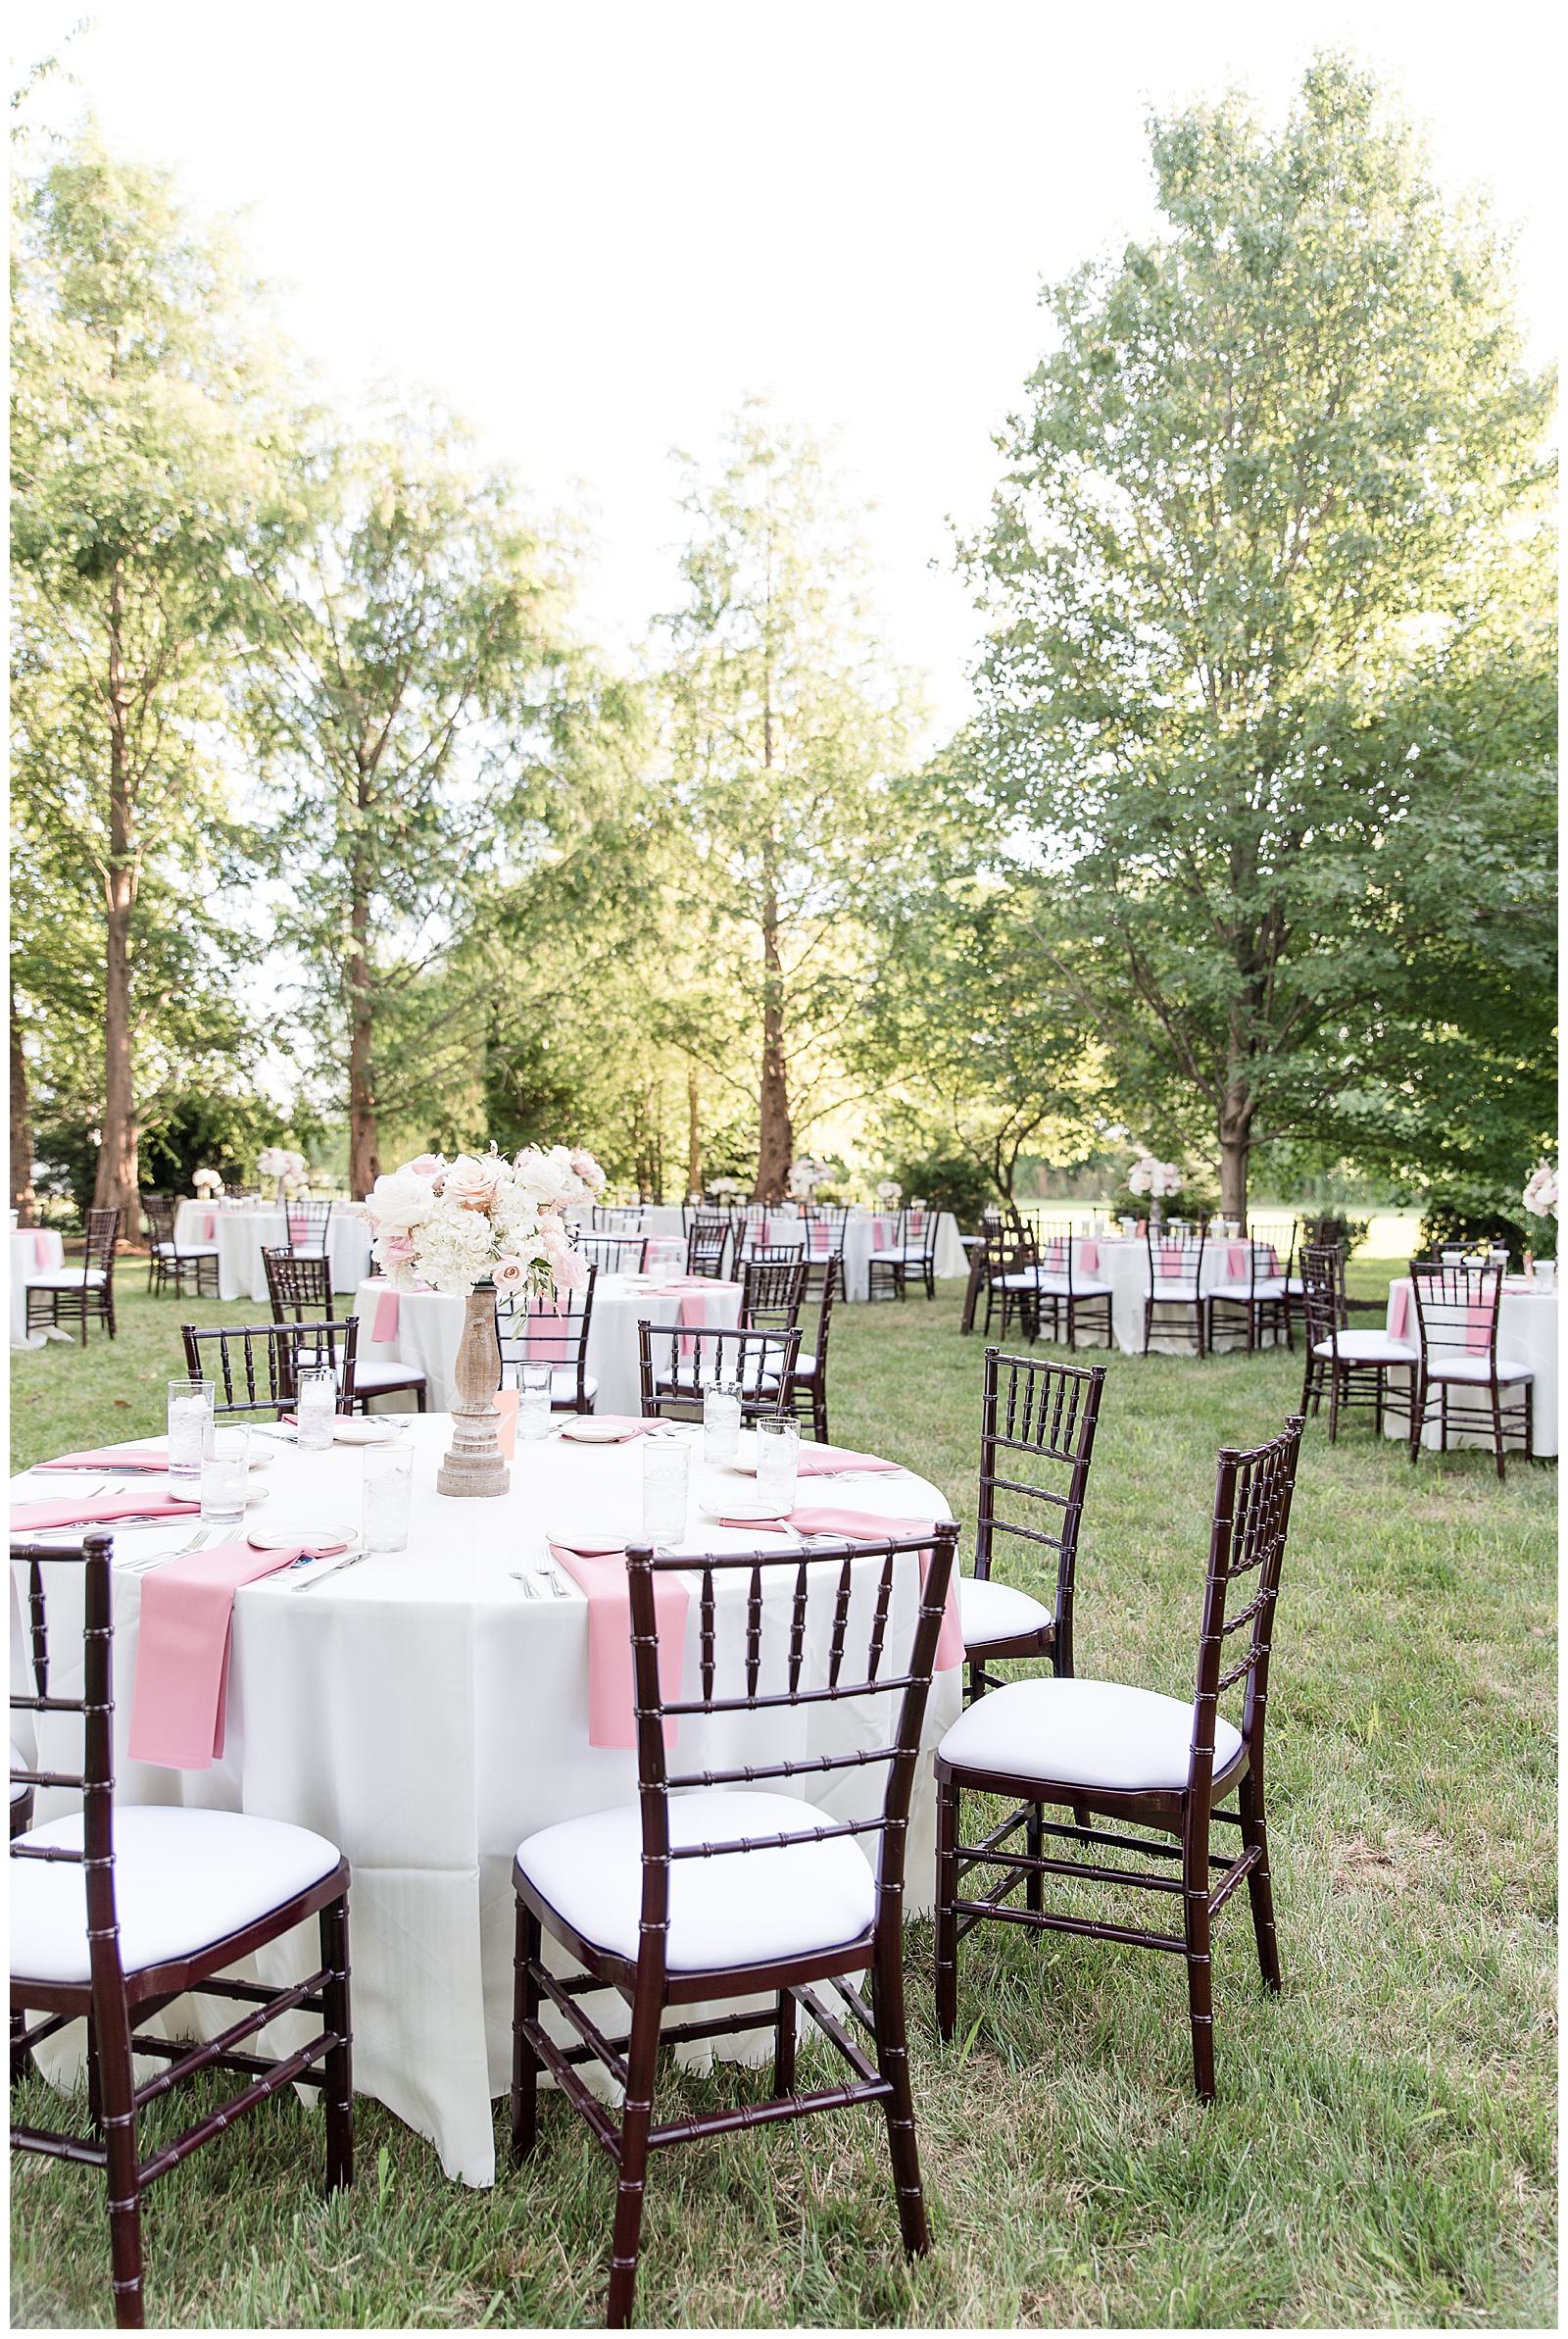 stunning outdoor reception area with white linens and pink napkins and beautiful flower centerpieces